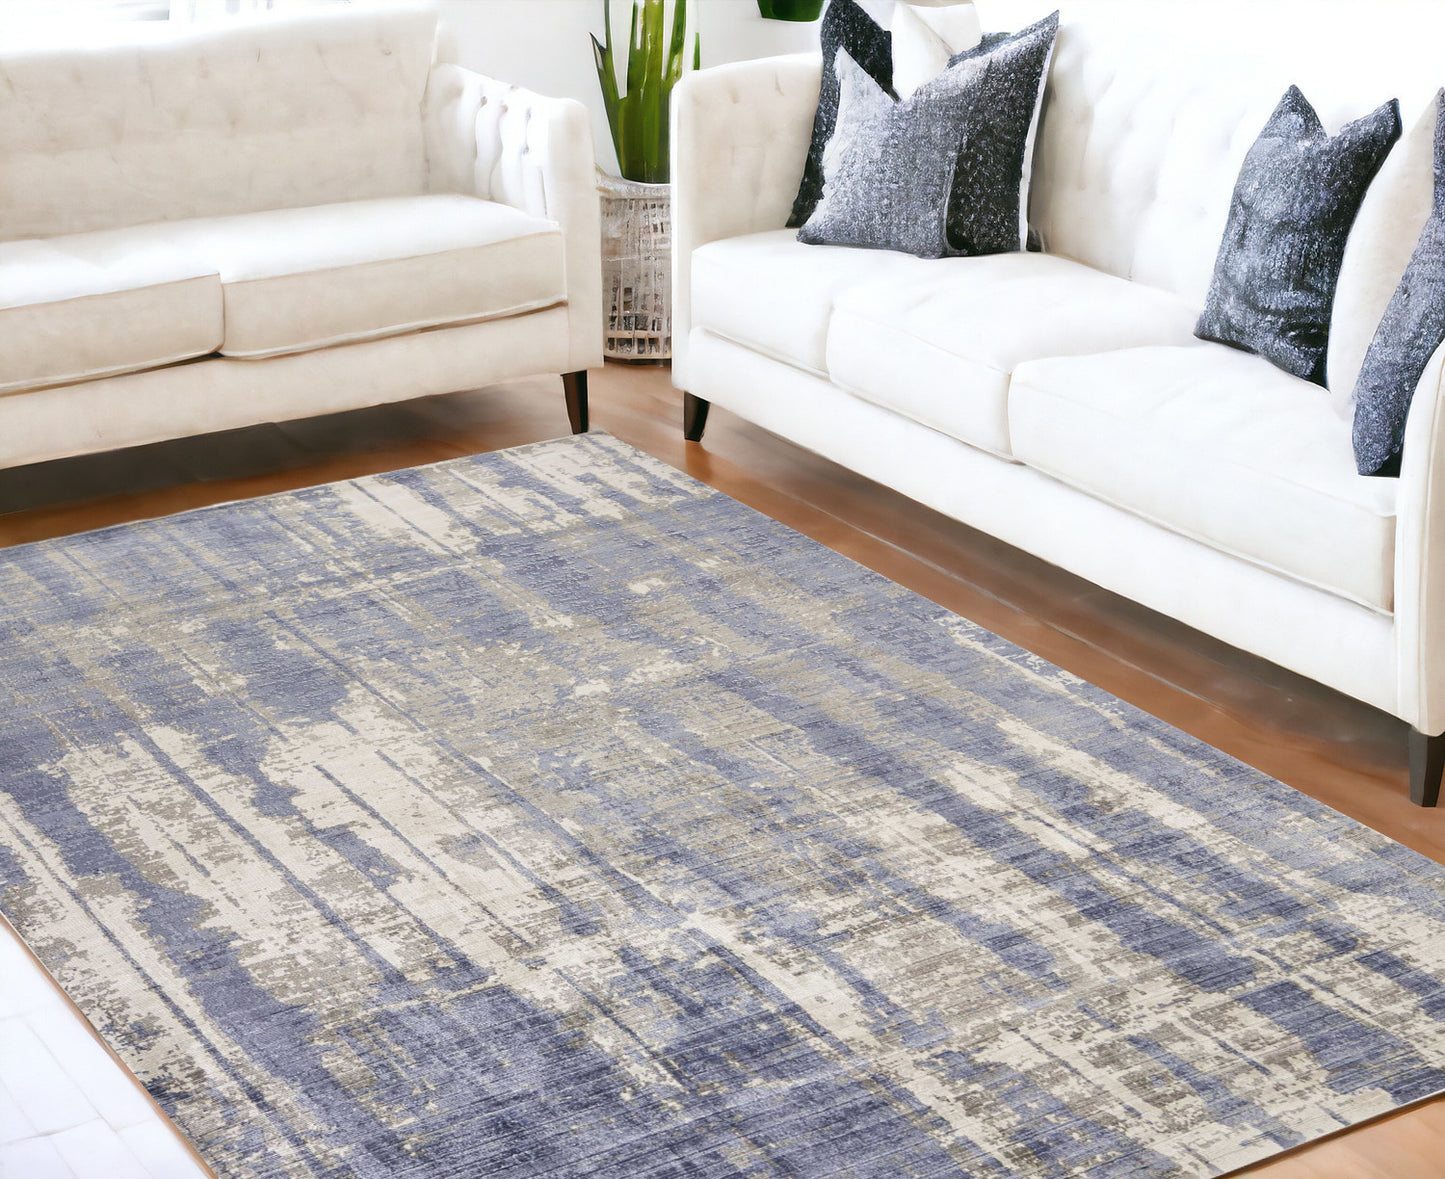 8' x 11' Blue and Gray Abstract Hand Loomed Area Rug